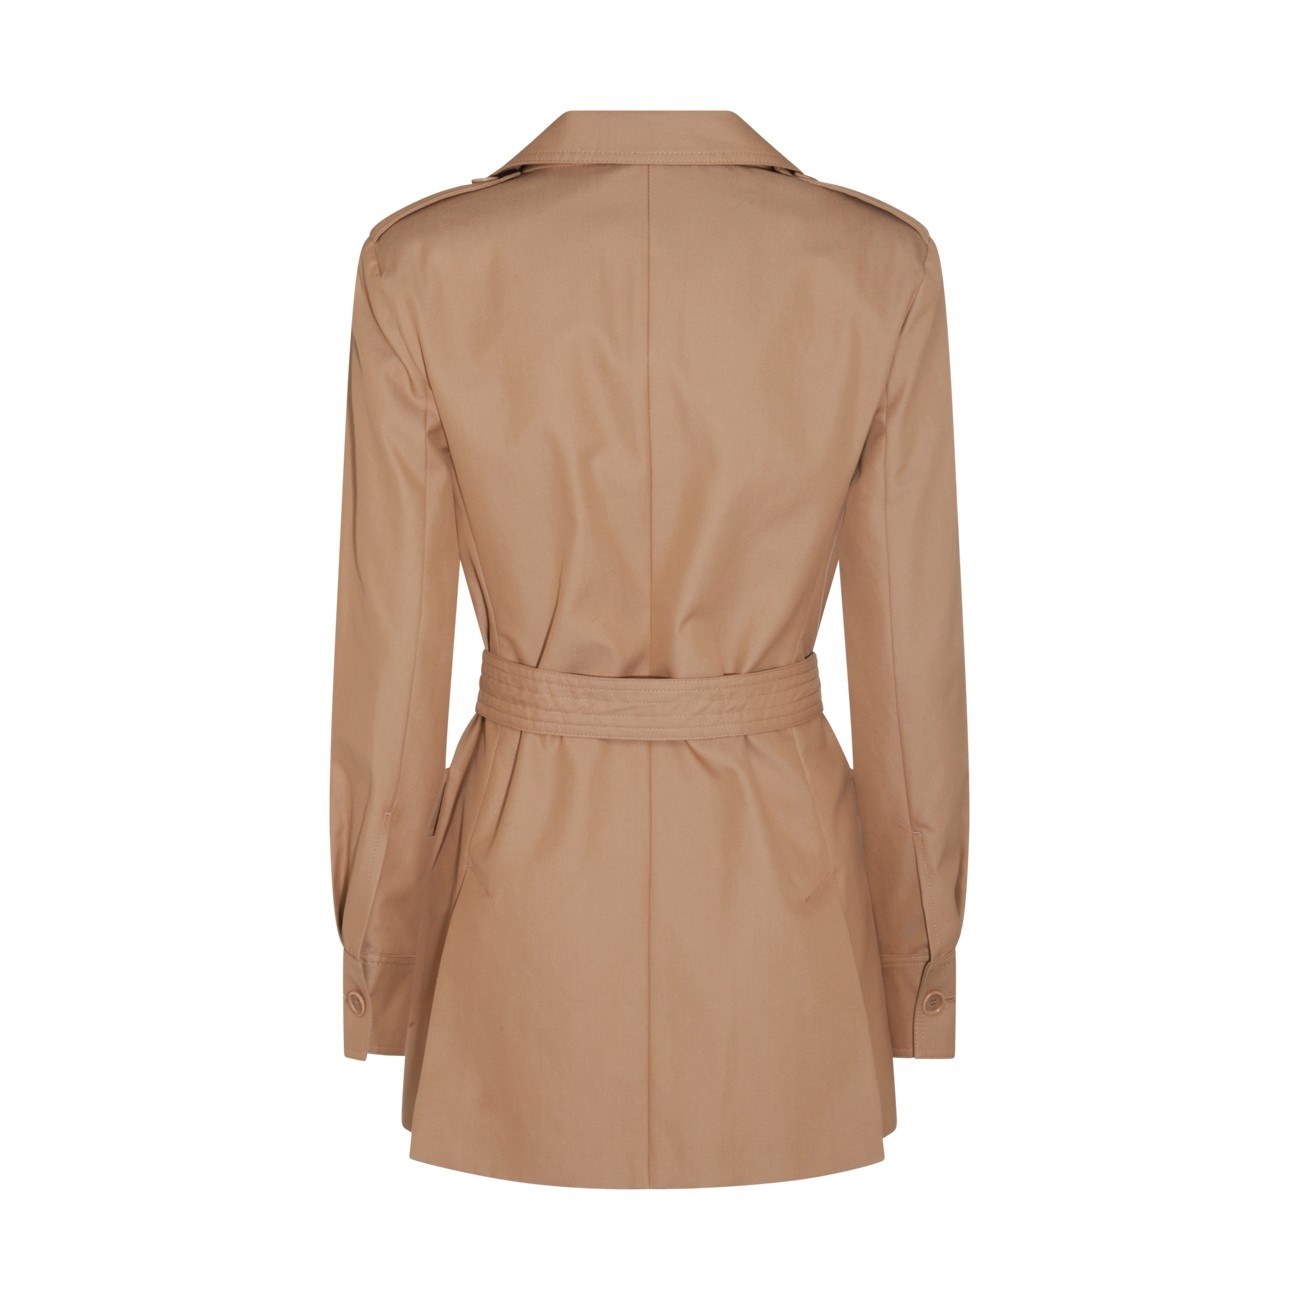 light beige pacos casual jacket - 2